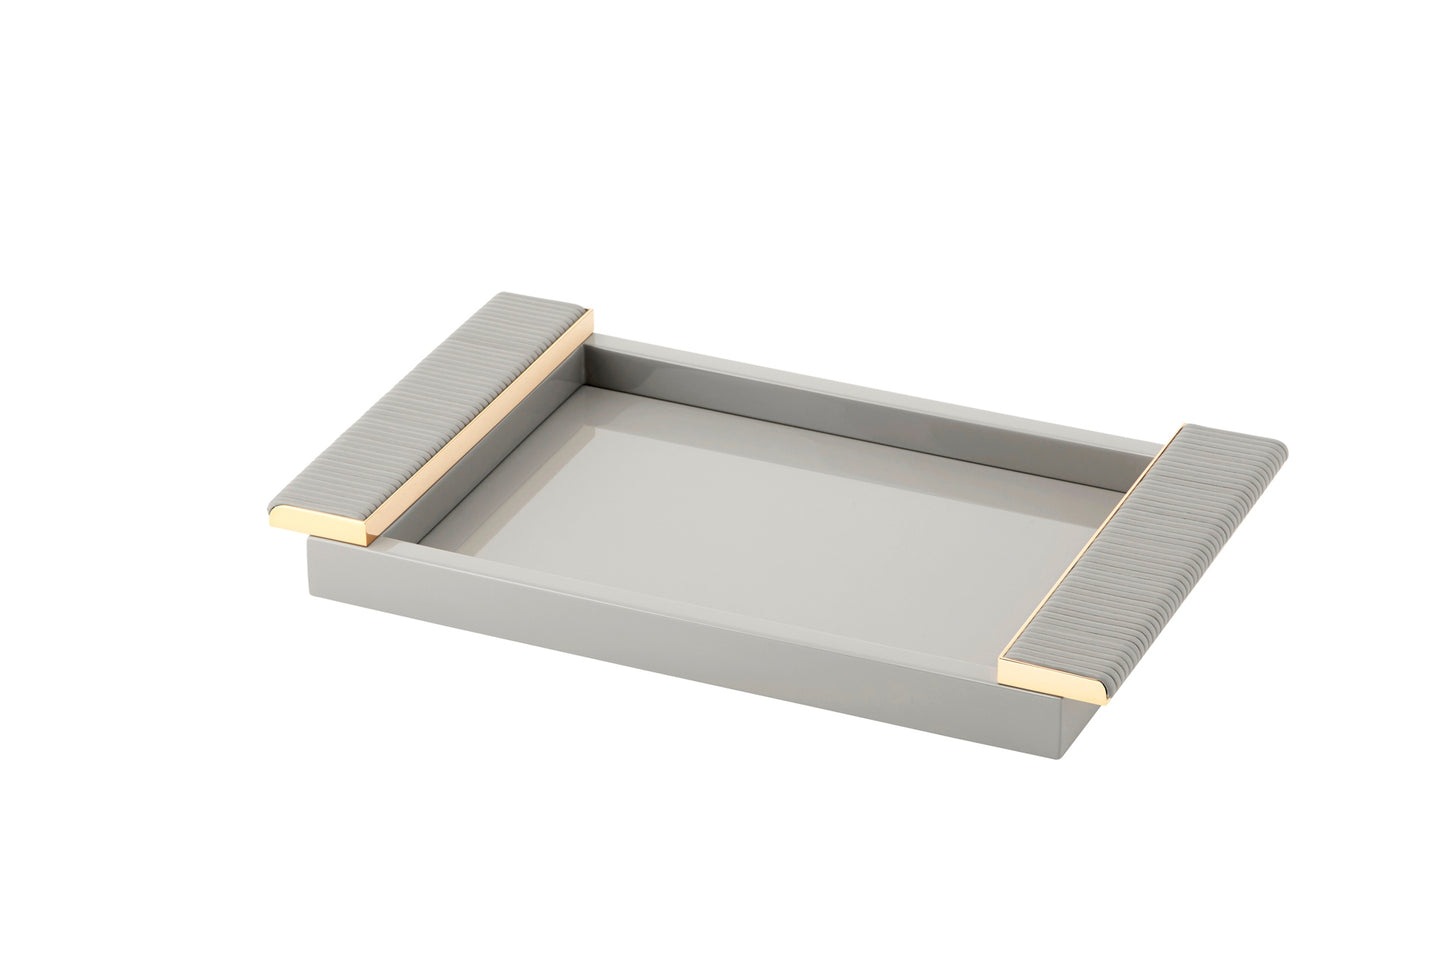 Riviere Circe Lacquer Rectangular Tray | Lacquered Tray | Leather Wrapped Handles | Chrome or Gold Details | Perfect for Yacht Interiors | Available at 2Jour Concierge, #1 luxury high-end gift & lifestyle shop